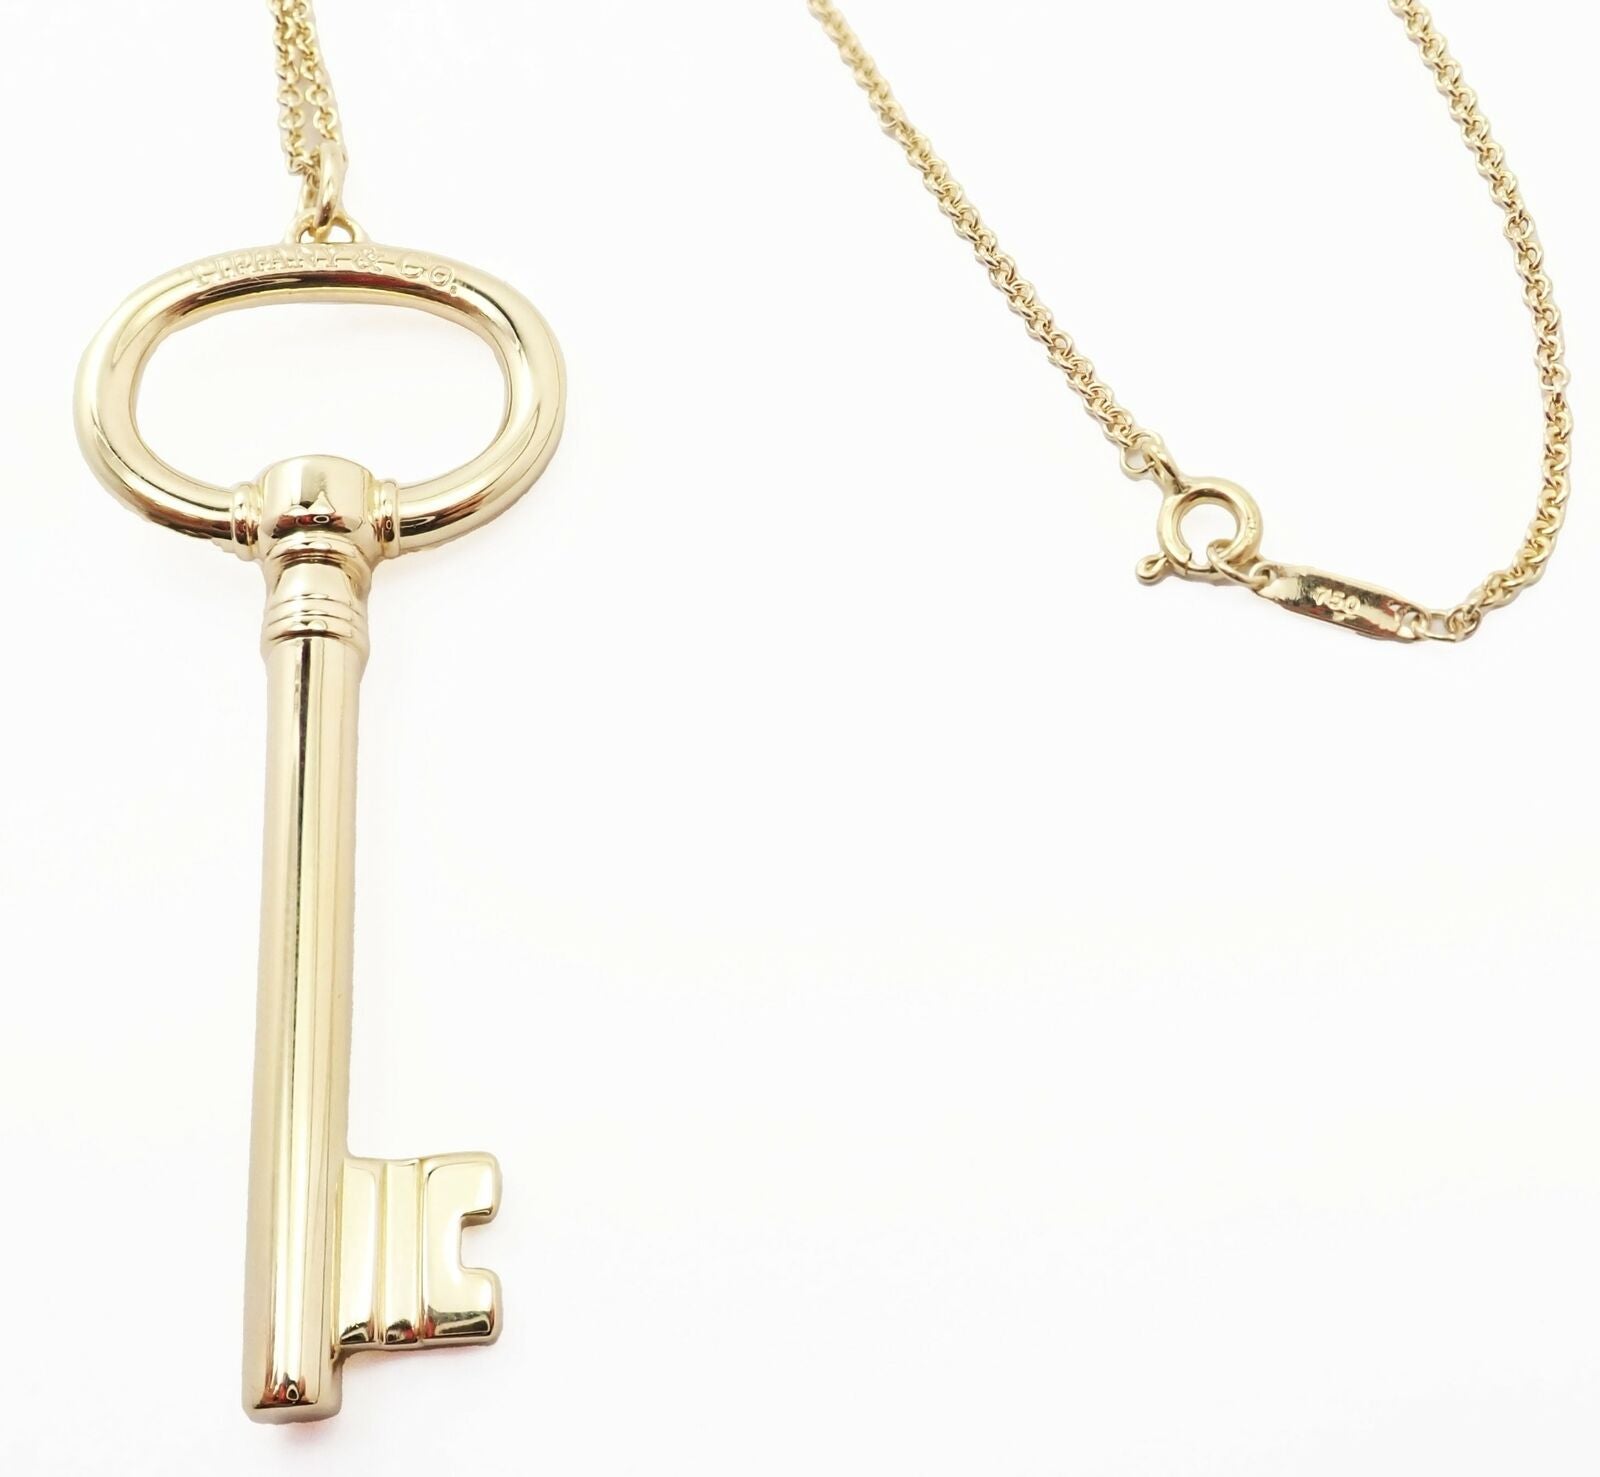 Tiffany & Co Jewelry & Watches:Fine Jewelry:Necklaces & Pendants Authentic! Tiffany & Co 18k Yellow Gold Oval Key Pendant Necklace